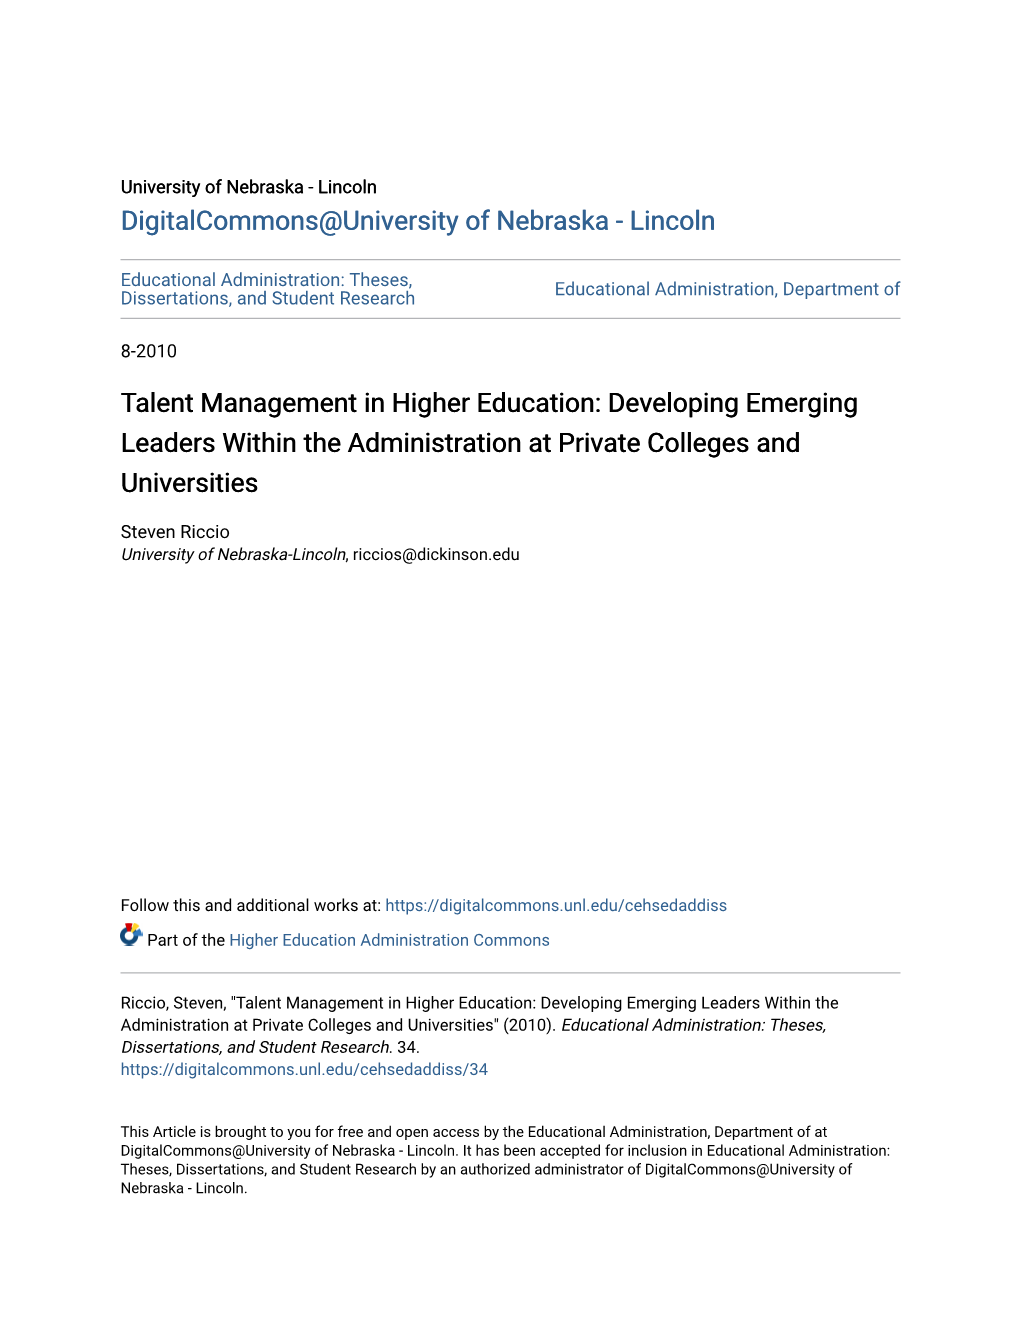 Talent Management in Higher Education: Developing Emerging Leaders Within the Administration at Private Colleges and Universities